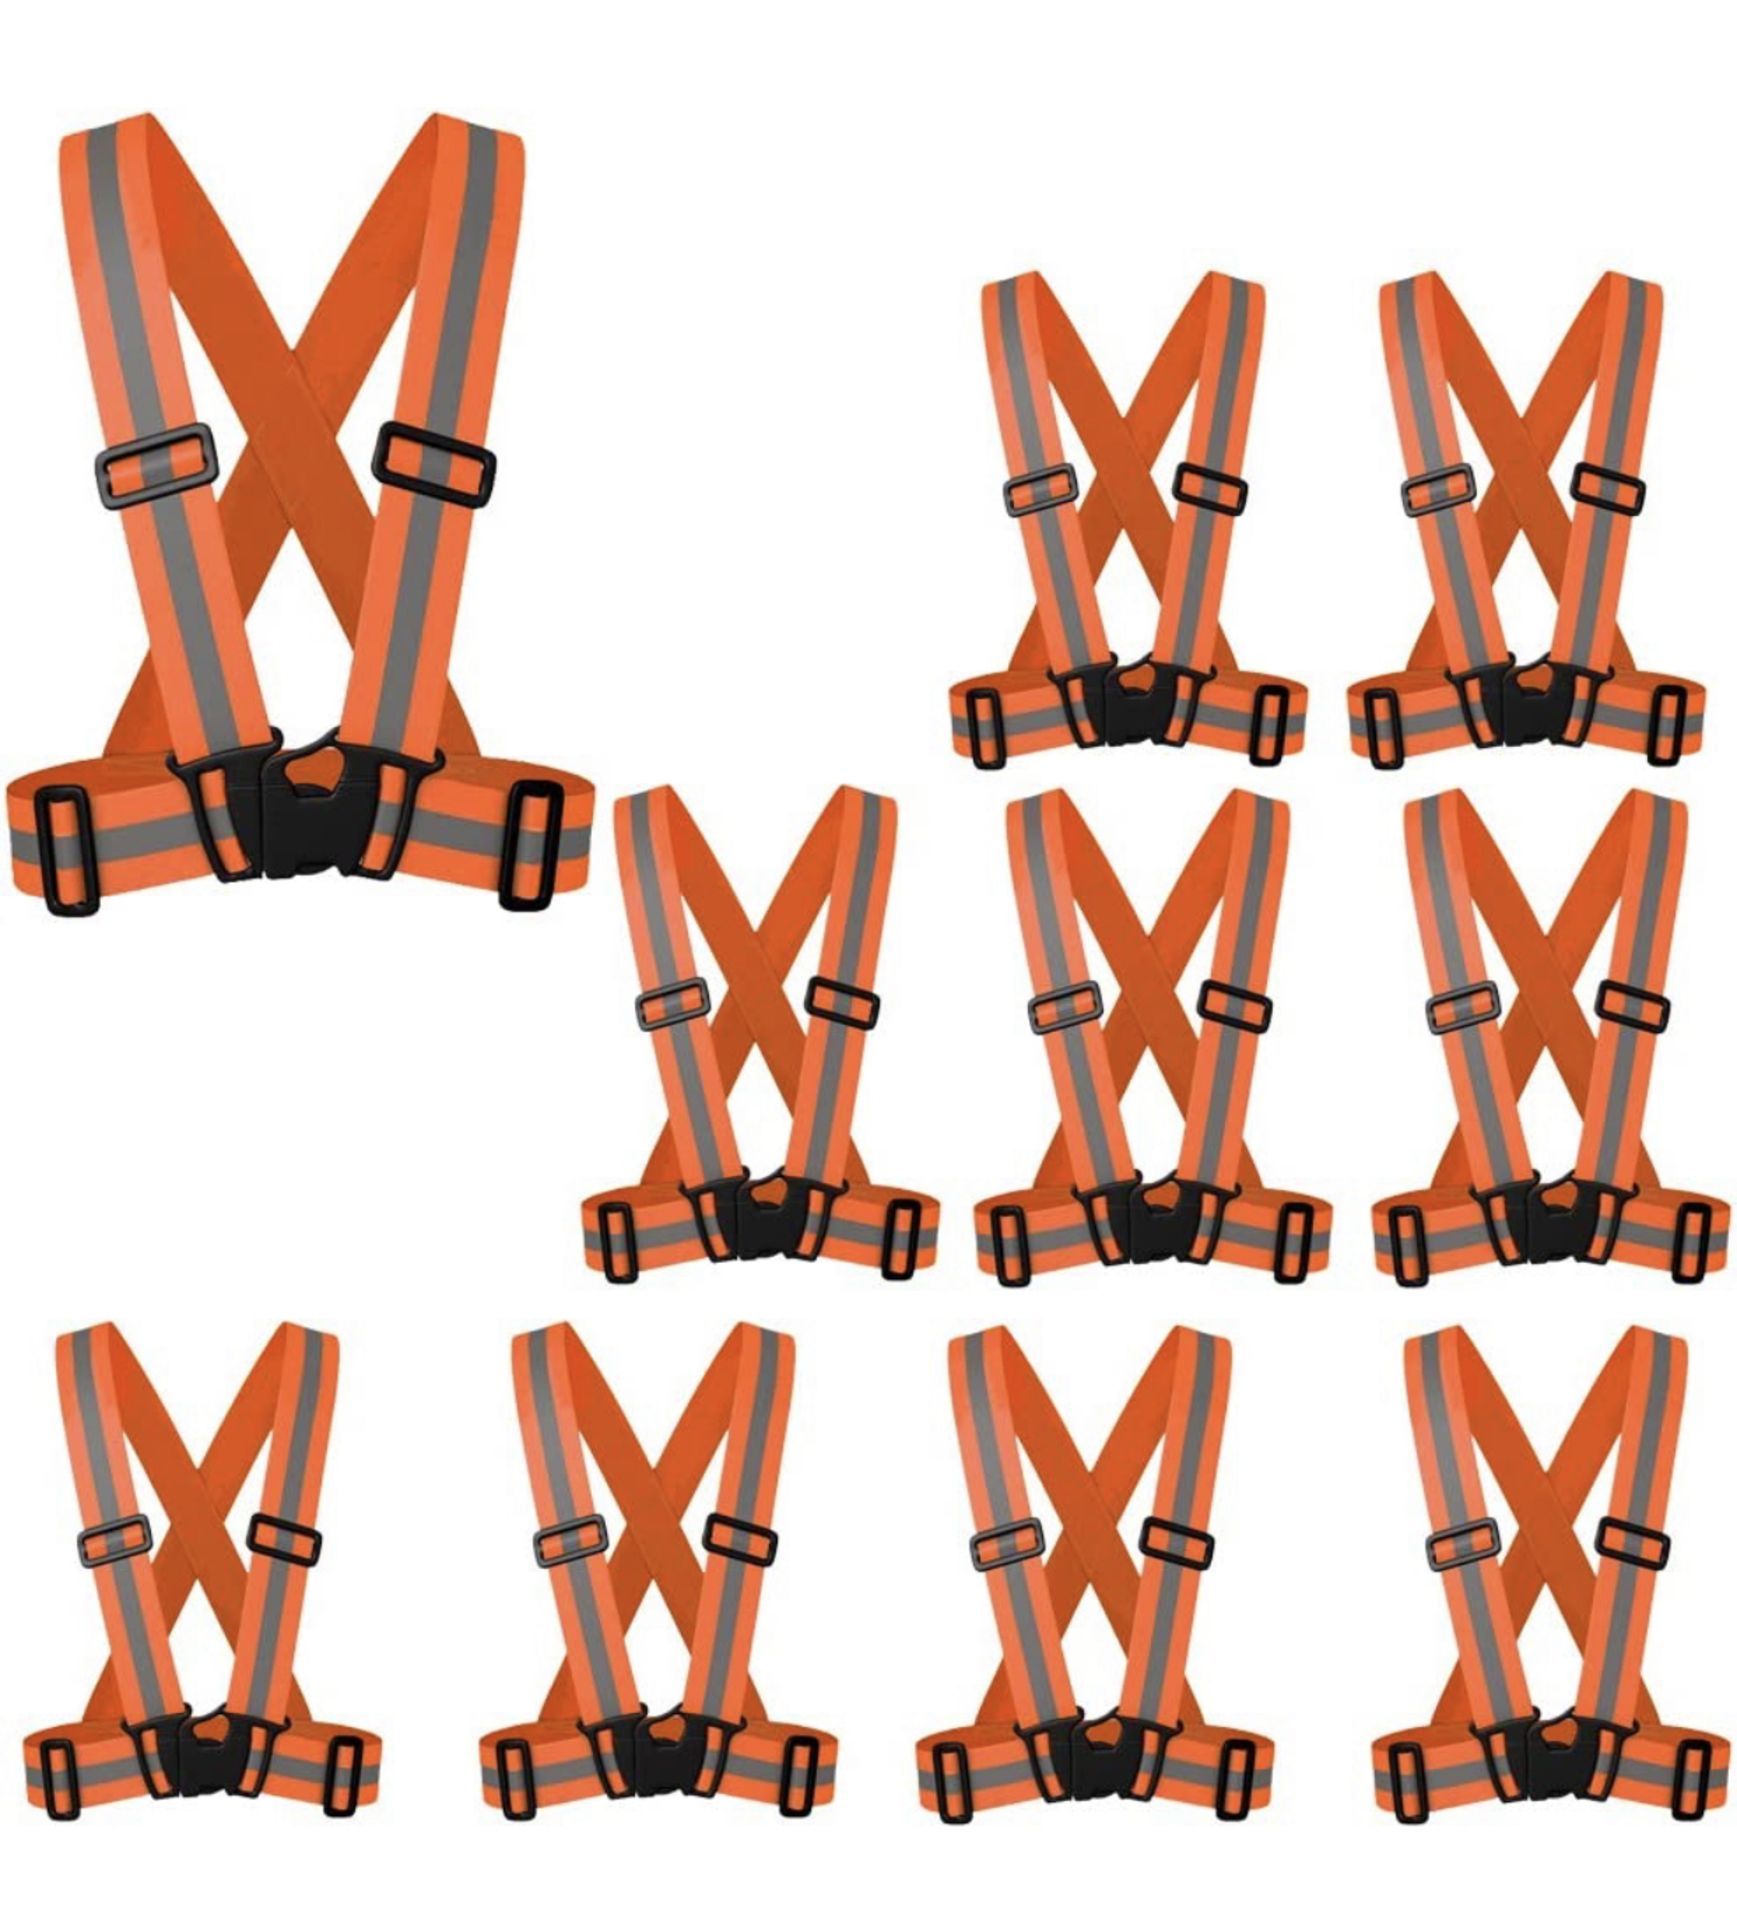 RRP £29.99 Zojo Safety Vests 10pcs Lightweight Adjustable and Elastic Safety High Visibilty